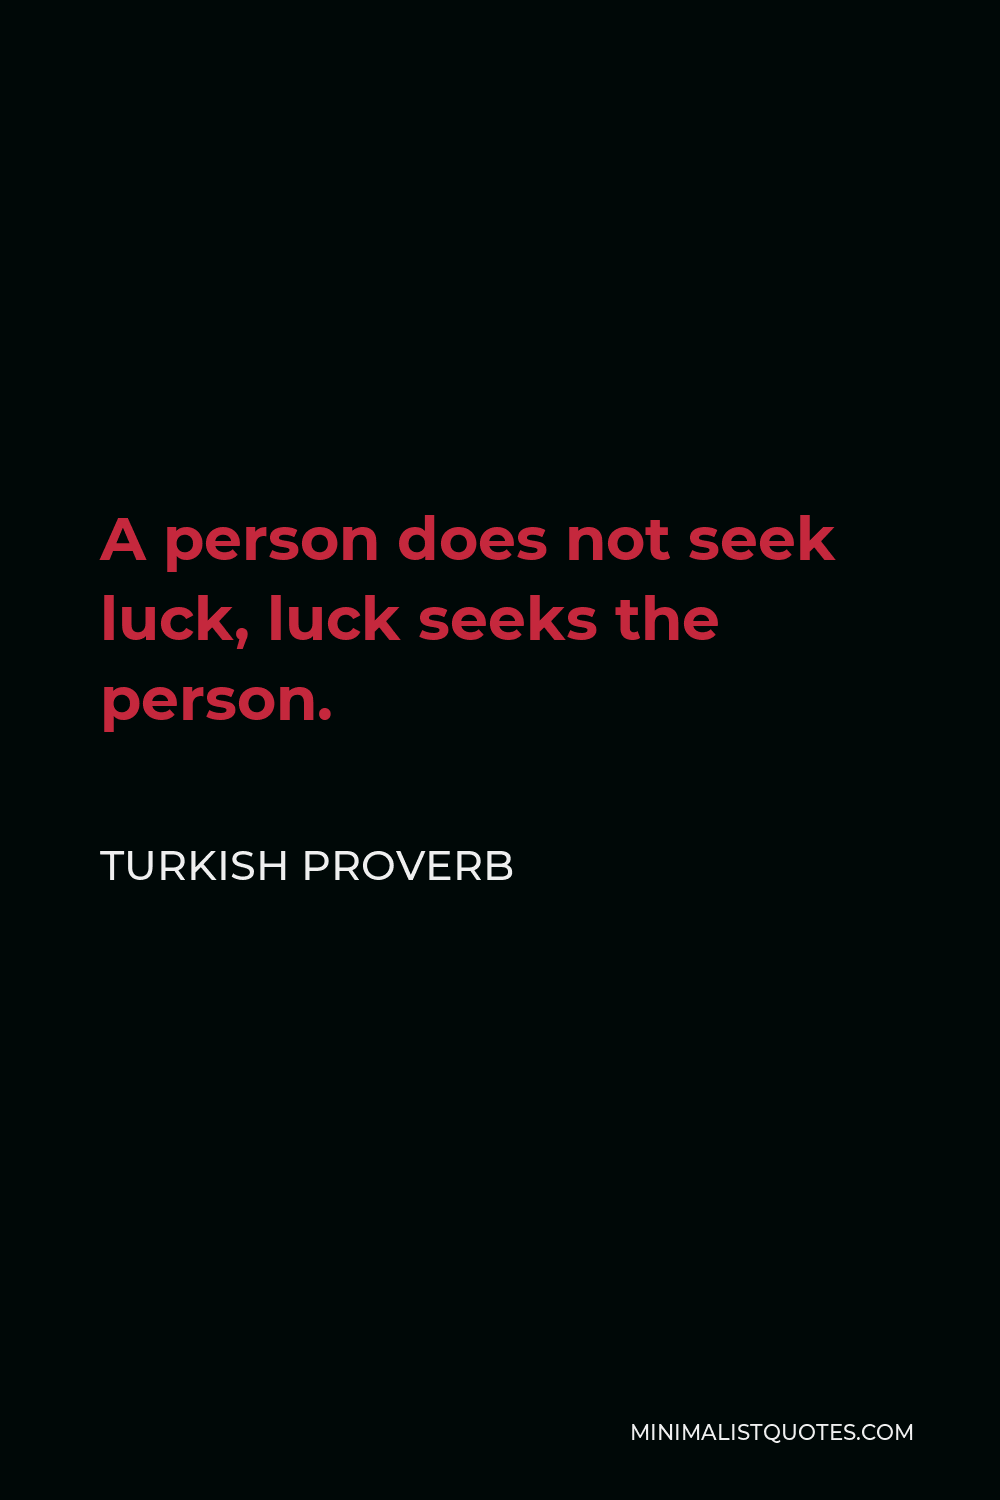 Turkish Proverb Quote - A person does not seek luck, luck seeks the person.